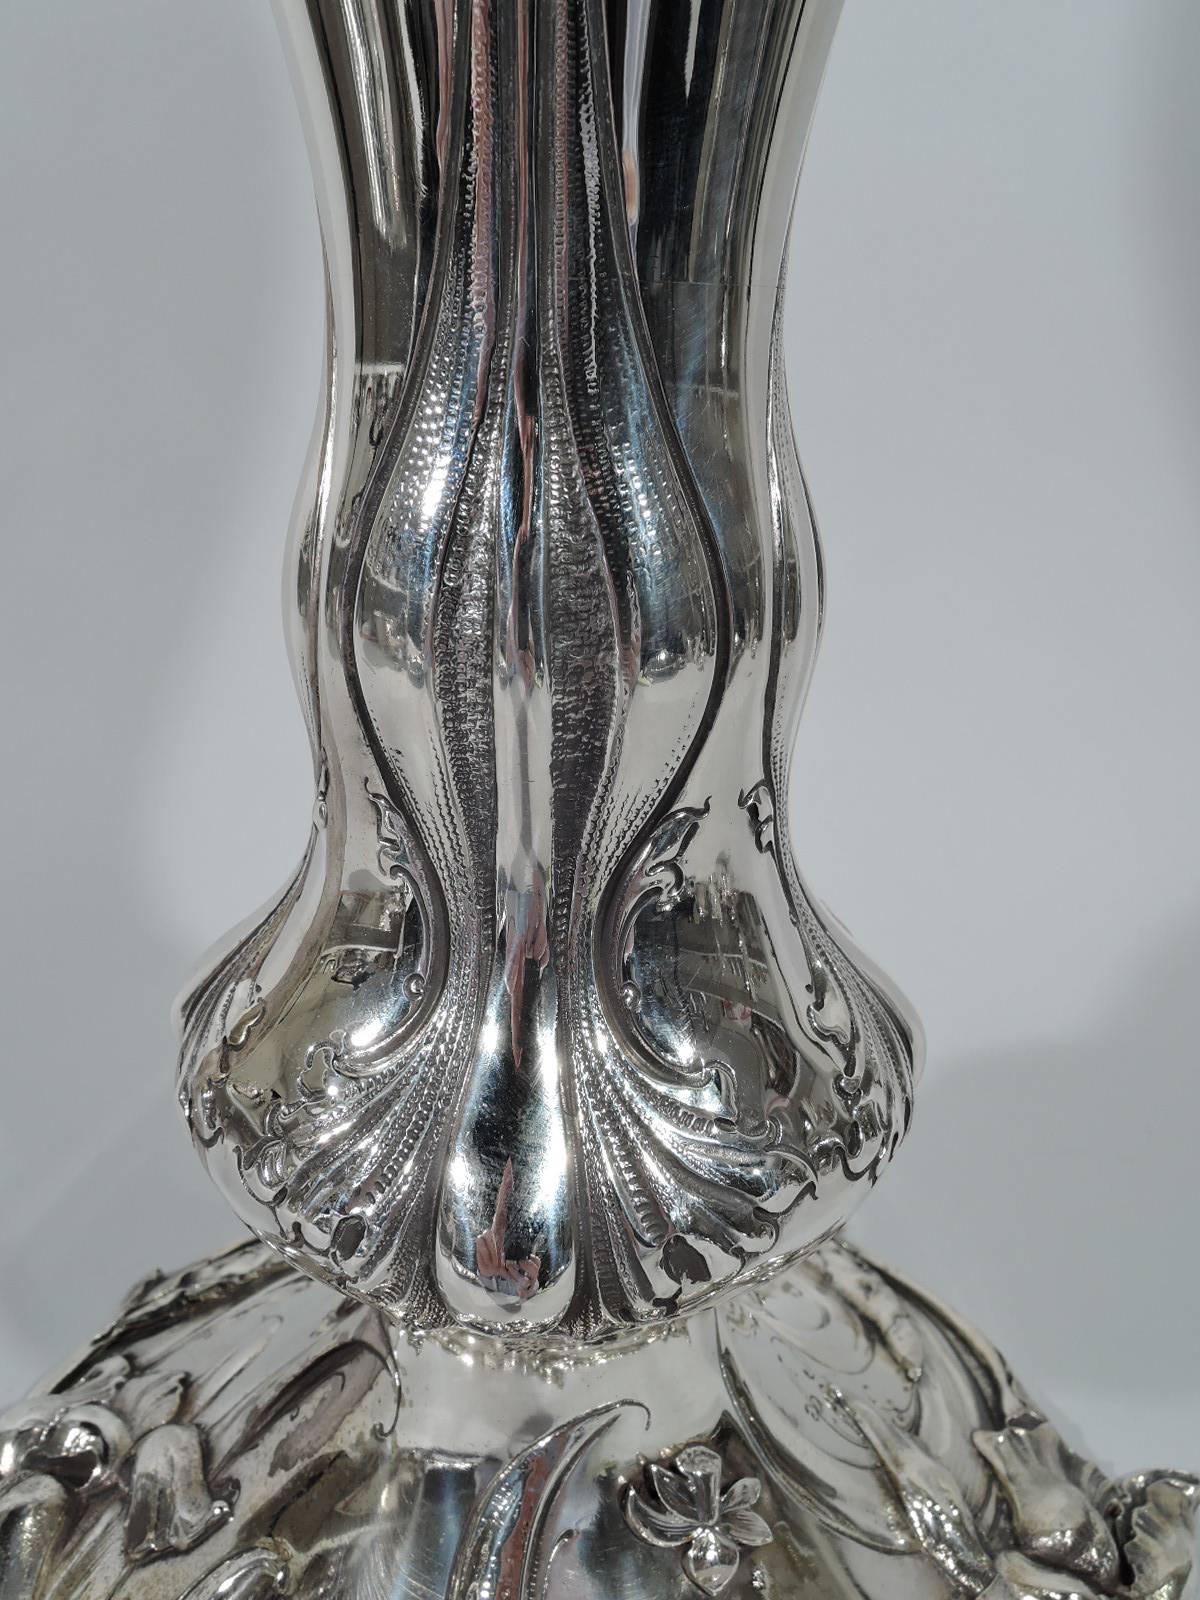 19th Century Tall Antique American Art Nouveau Sterling Silver Vase